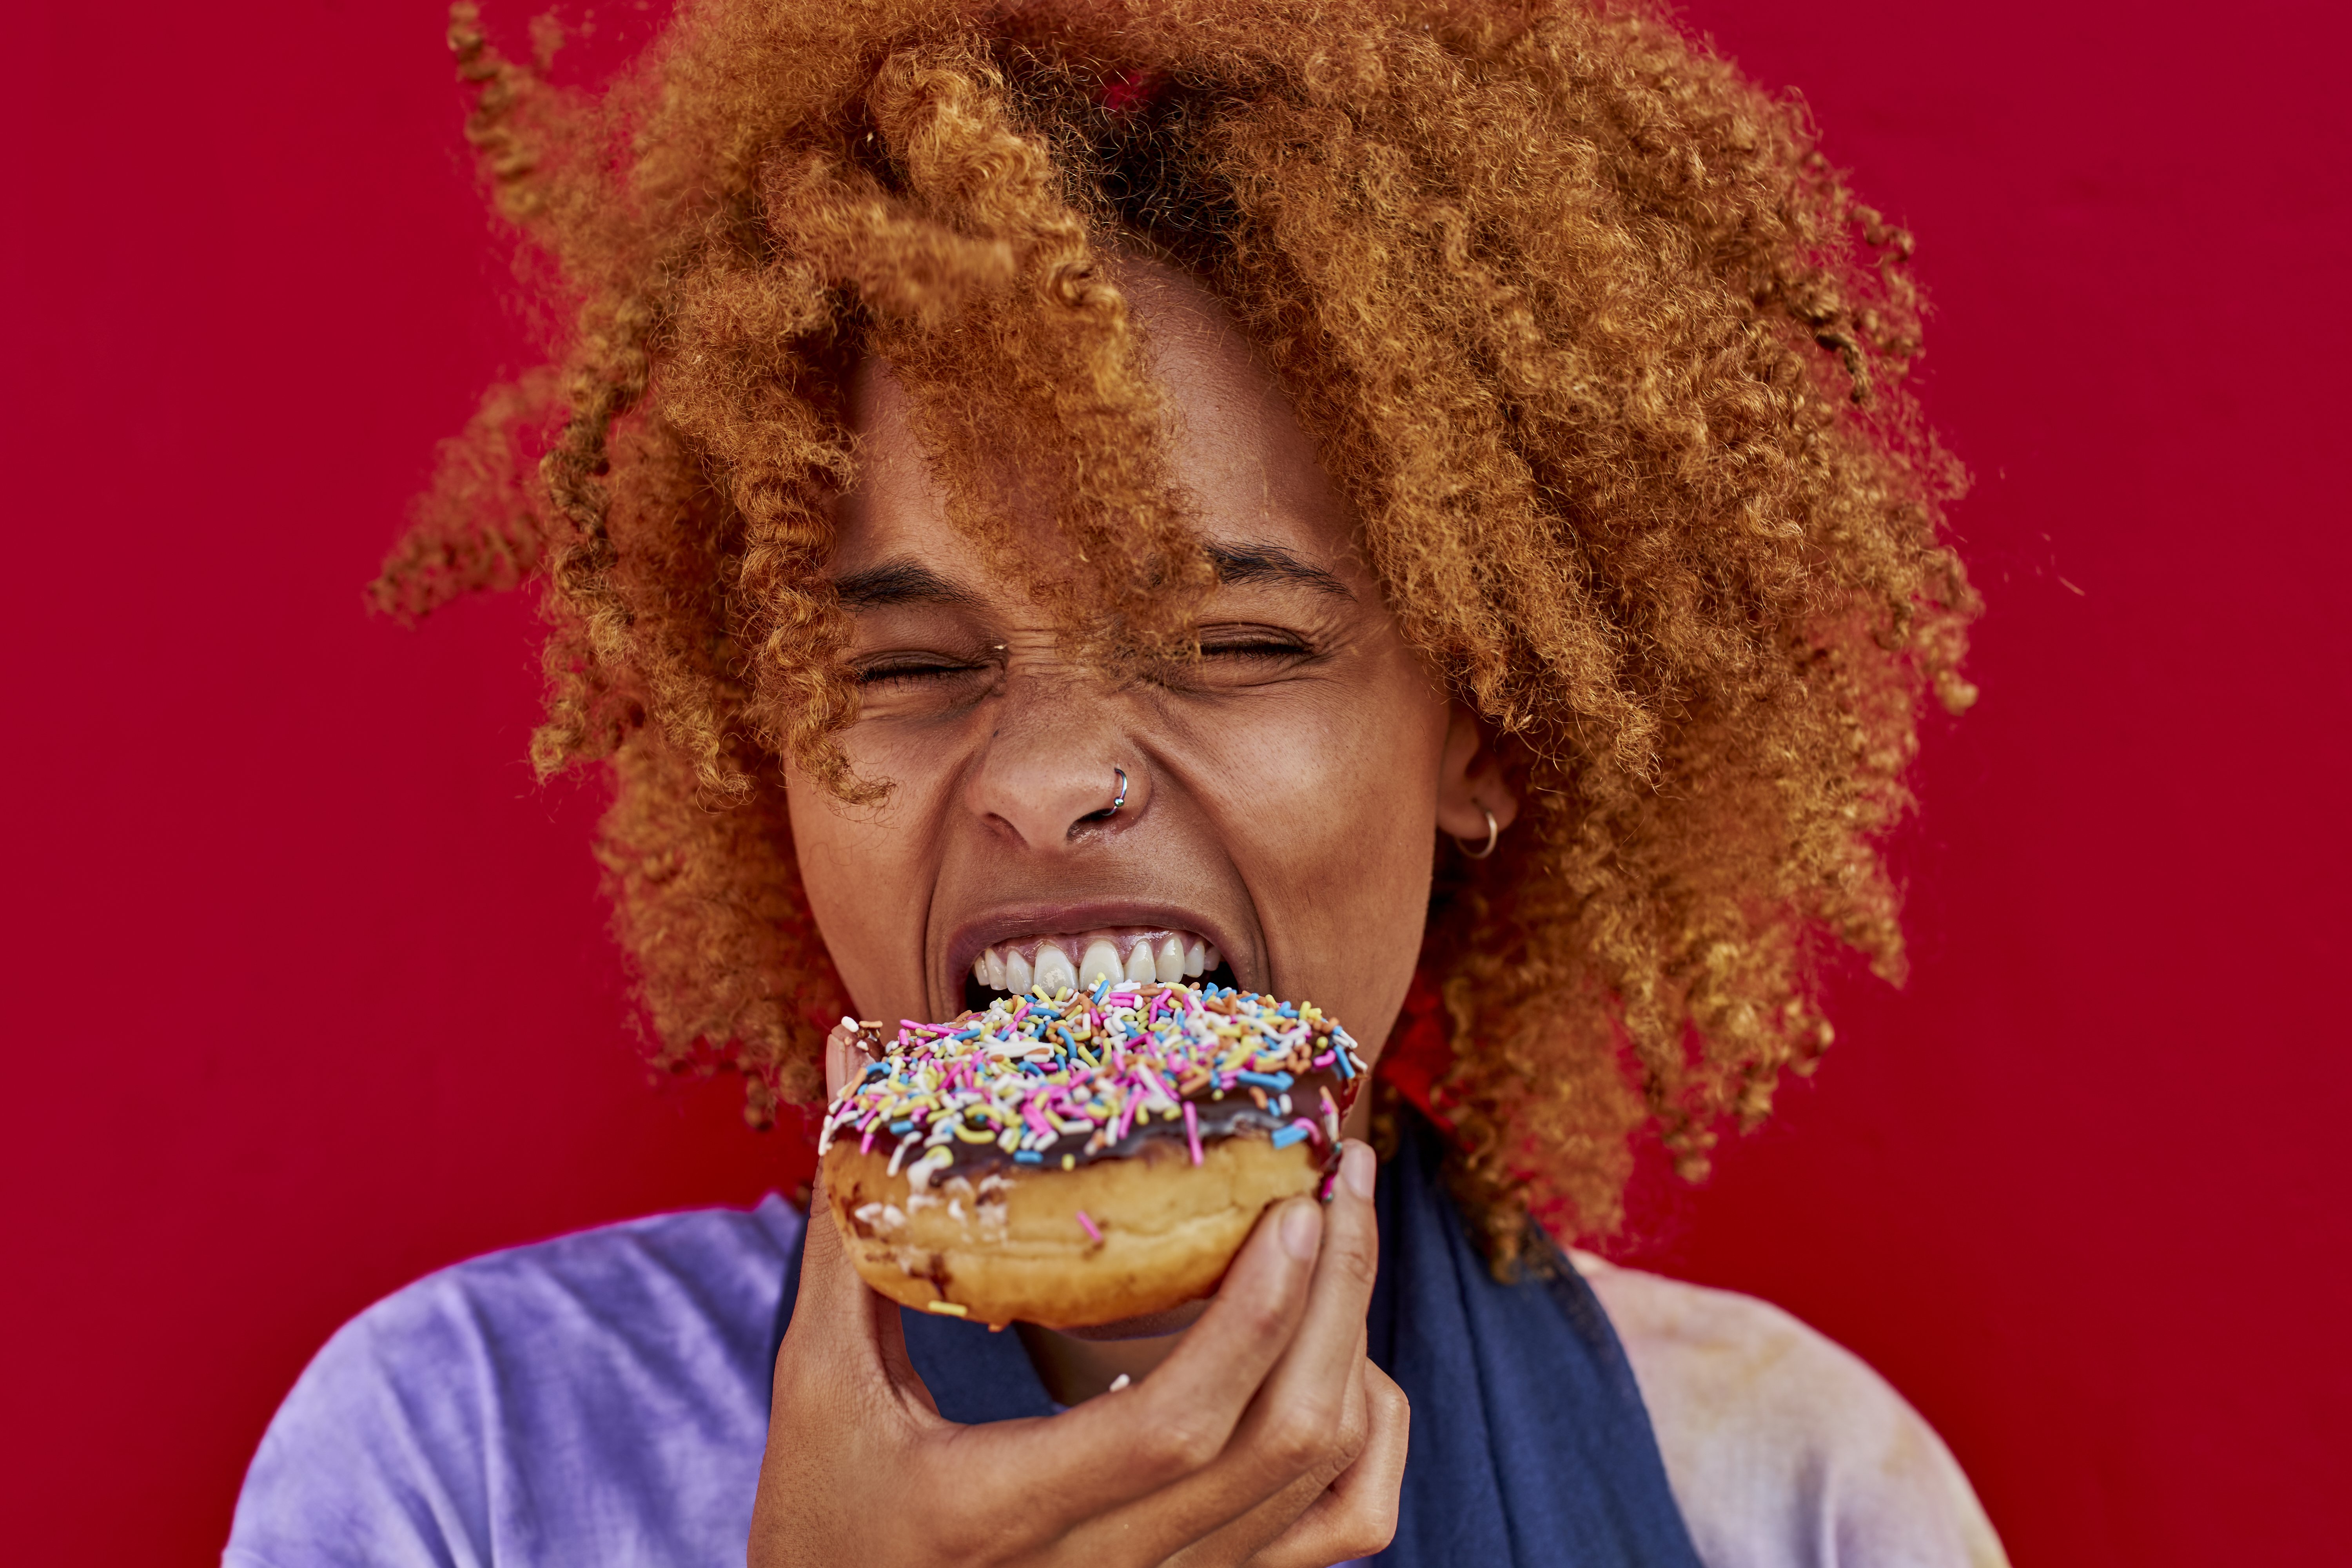 A portrait of woman eating a donut | Source: Getty Images